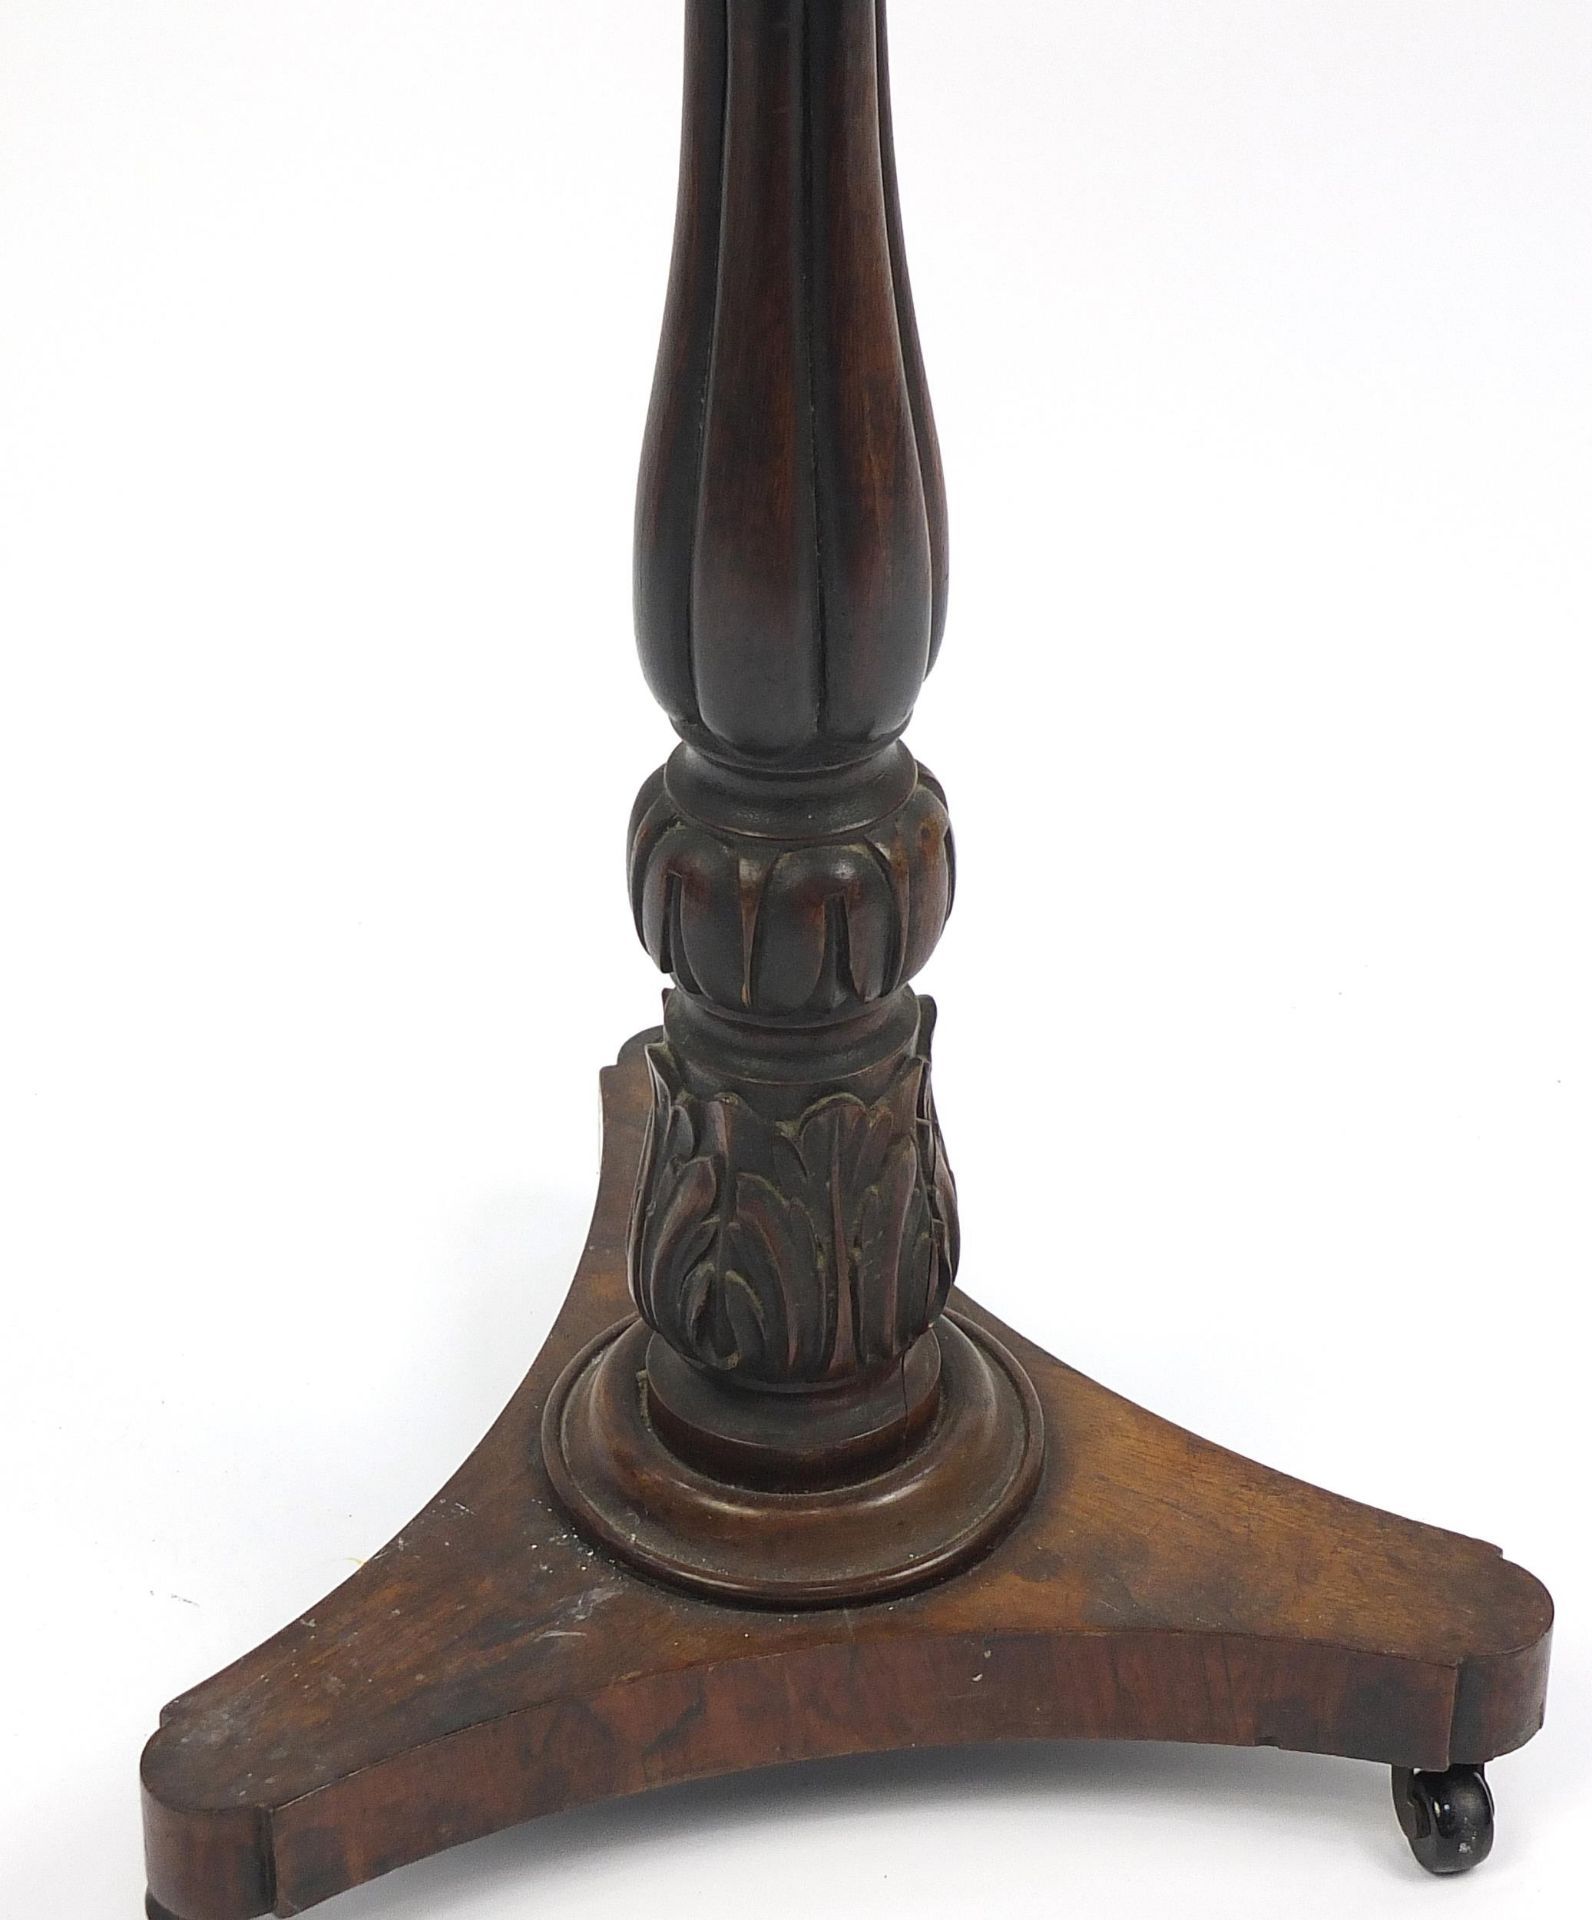 19th century rosewood chess table with carved column, 74cm H x 47cm W x 47cm D - Image 3 of 4